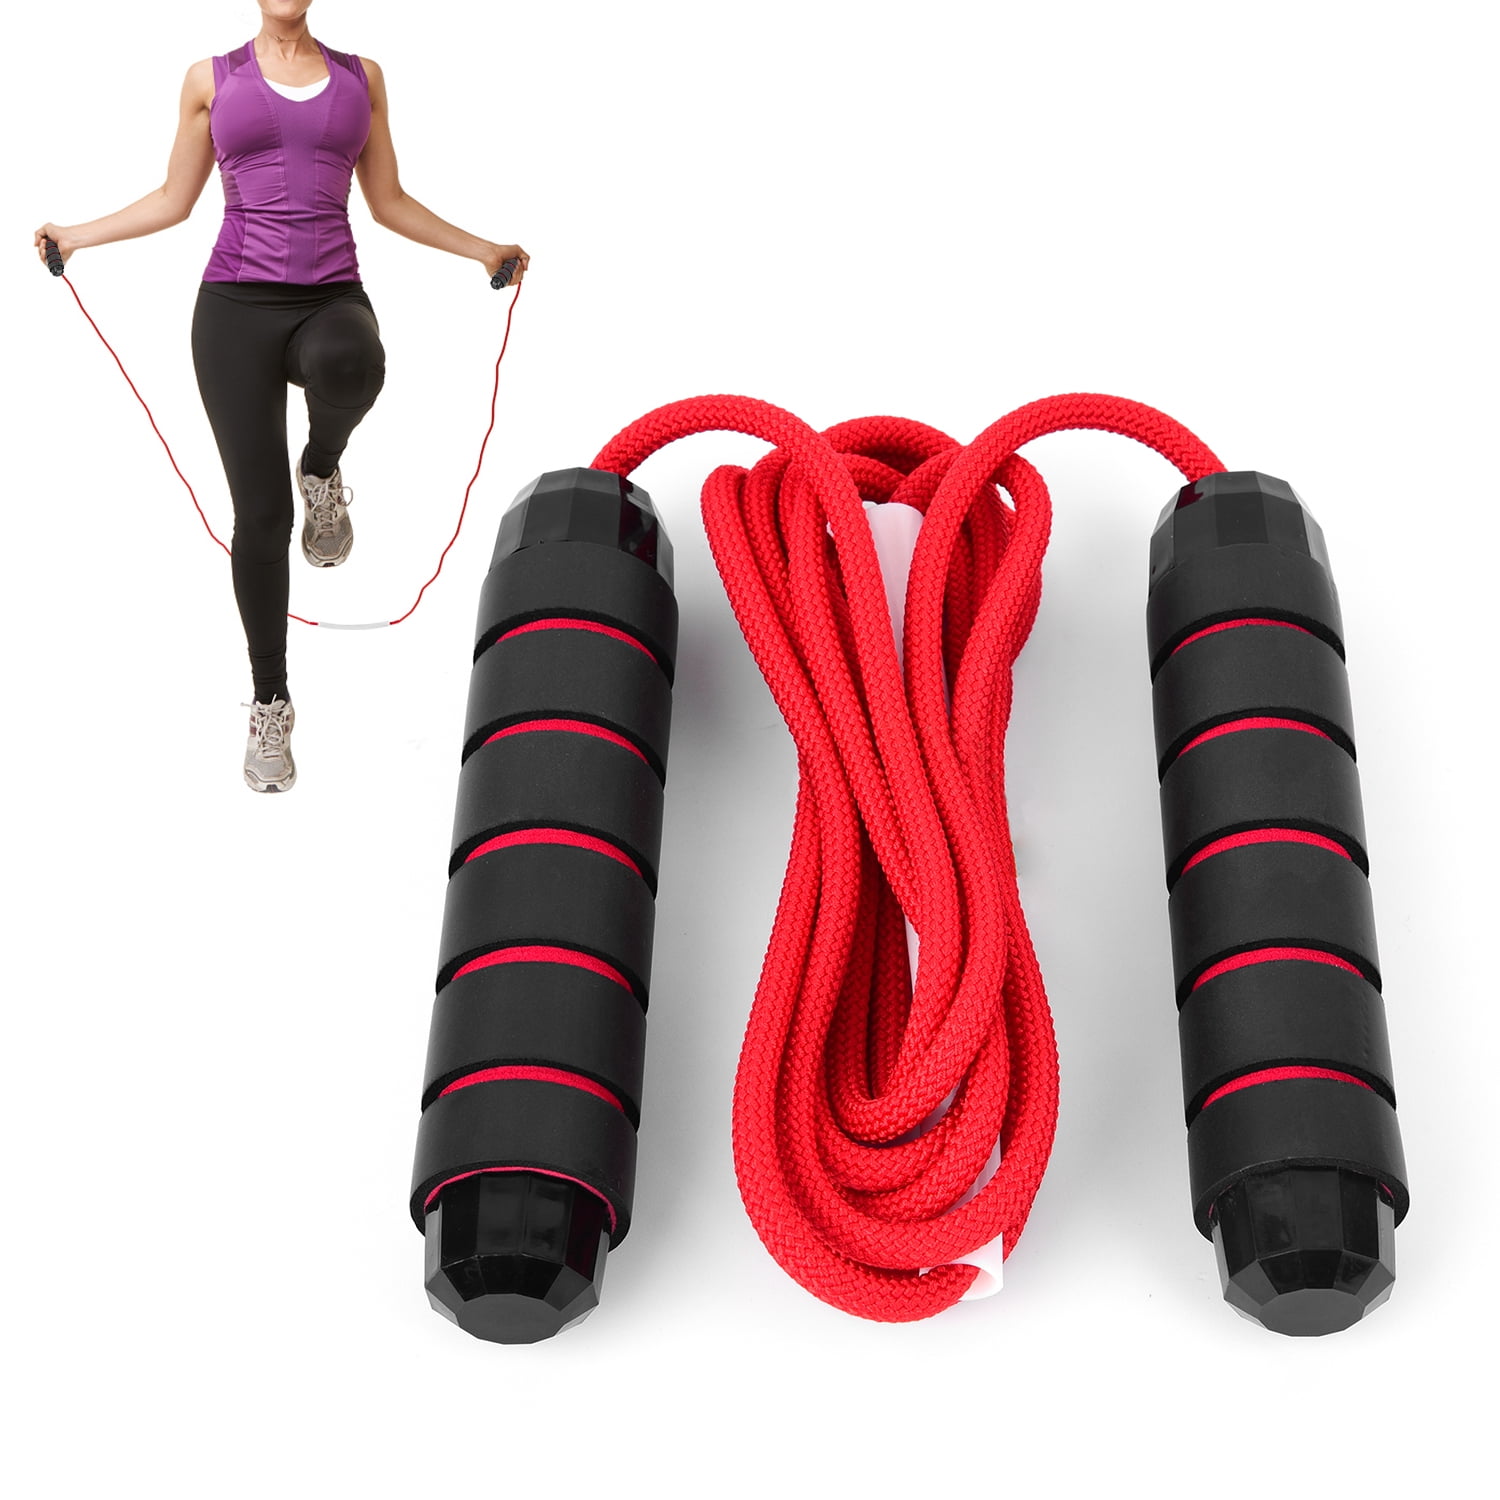 Skipping Rope Boxing Foams Handle Jumping Fitness Adults Kids Gym Home Training 